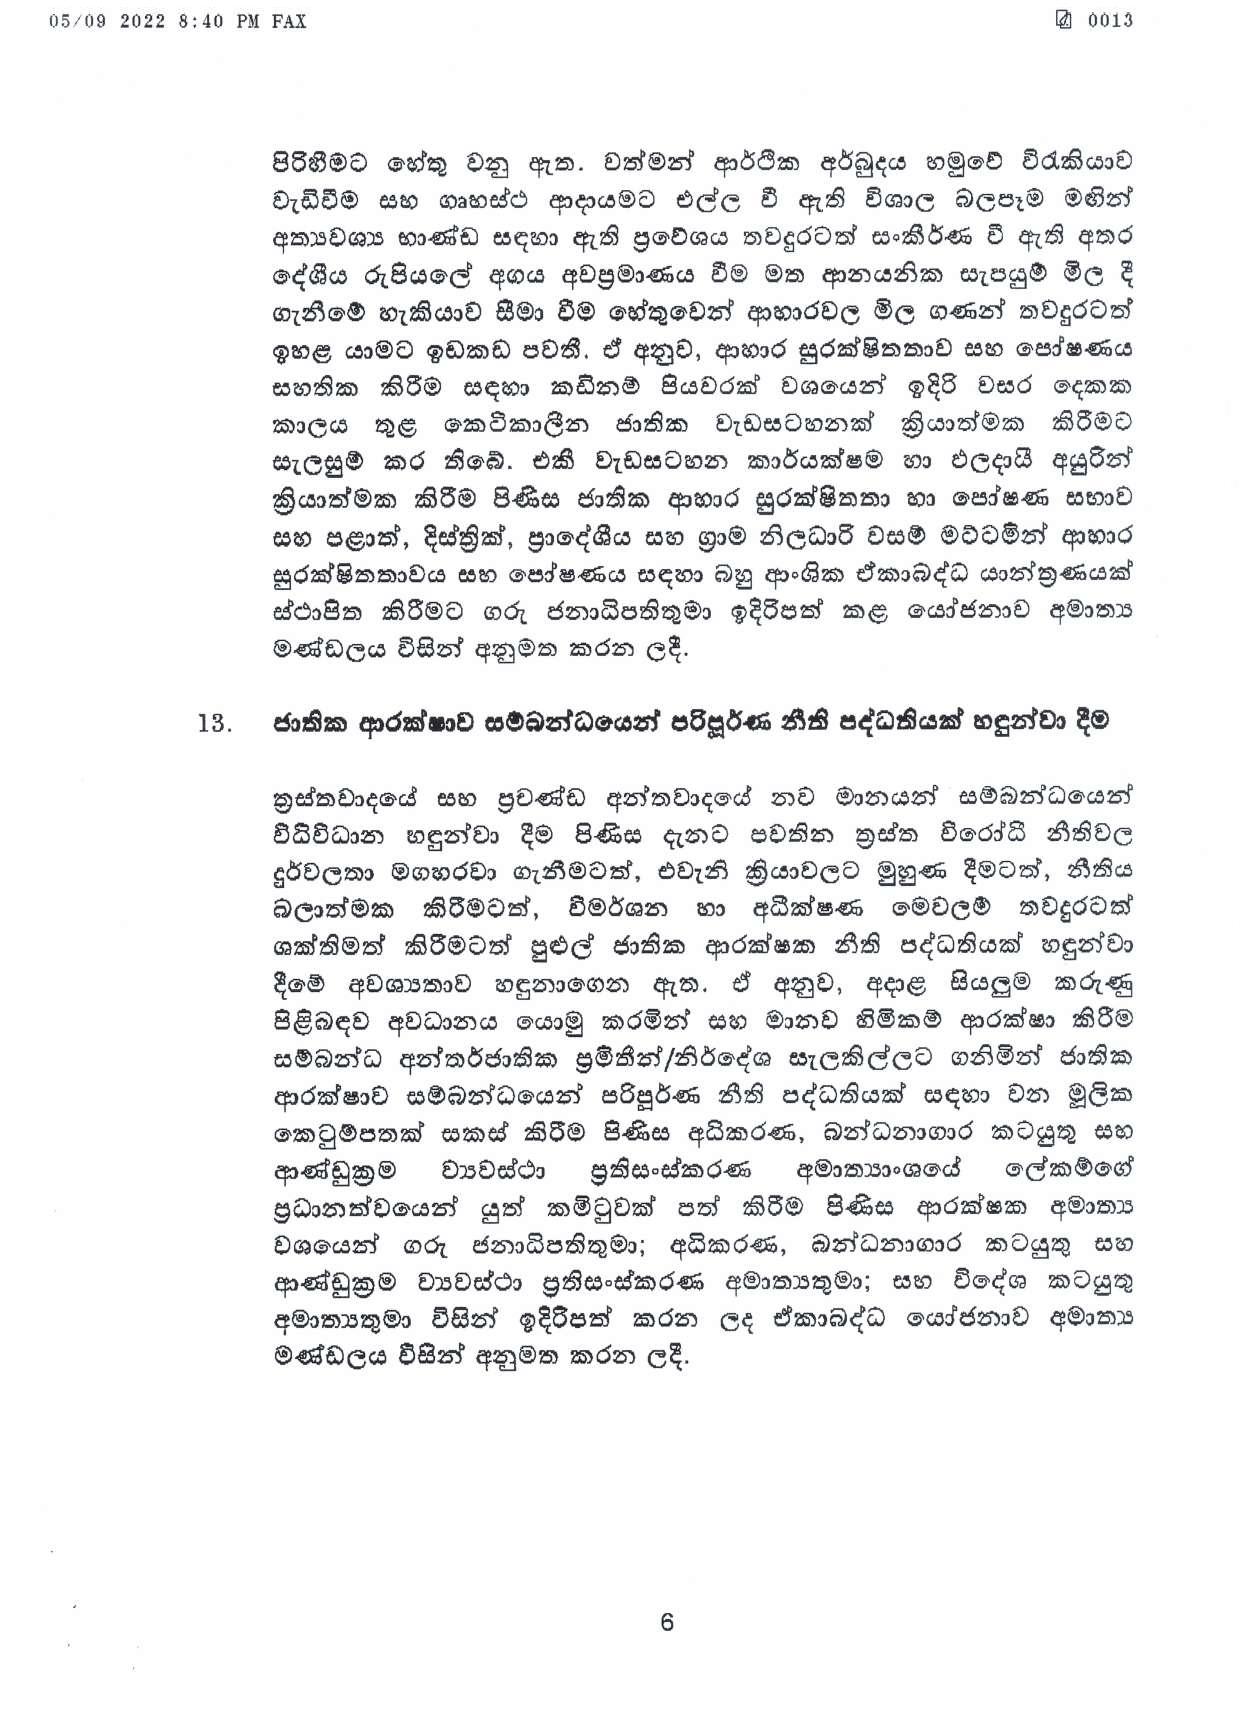 Cabinet Decision on 05.09.2022 page 006